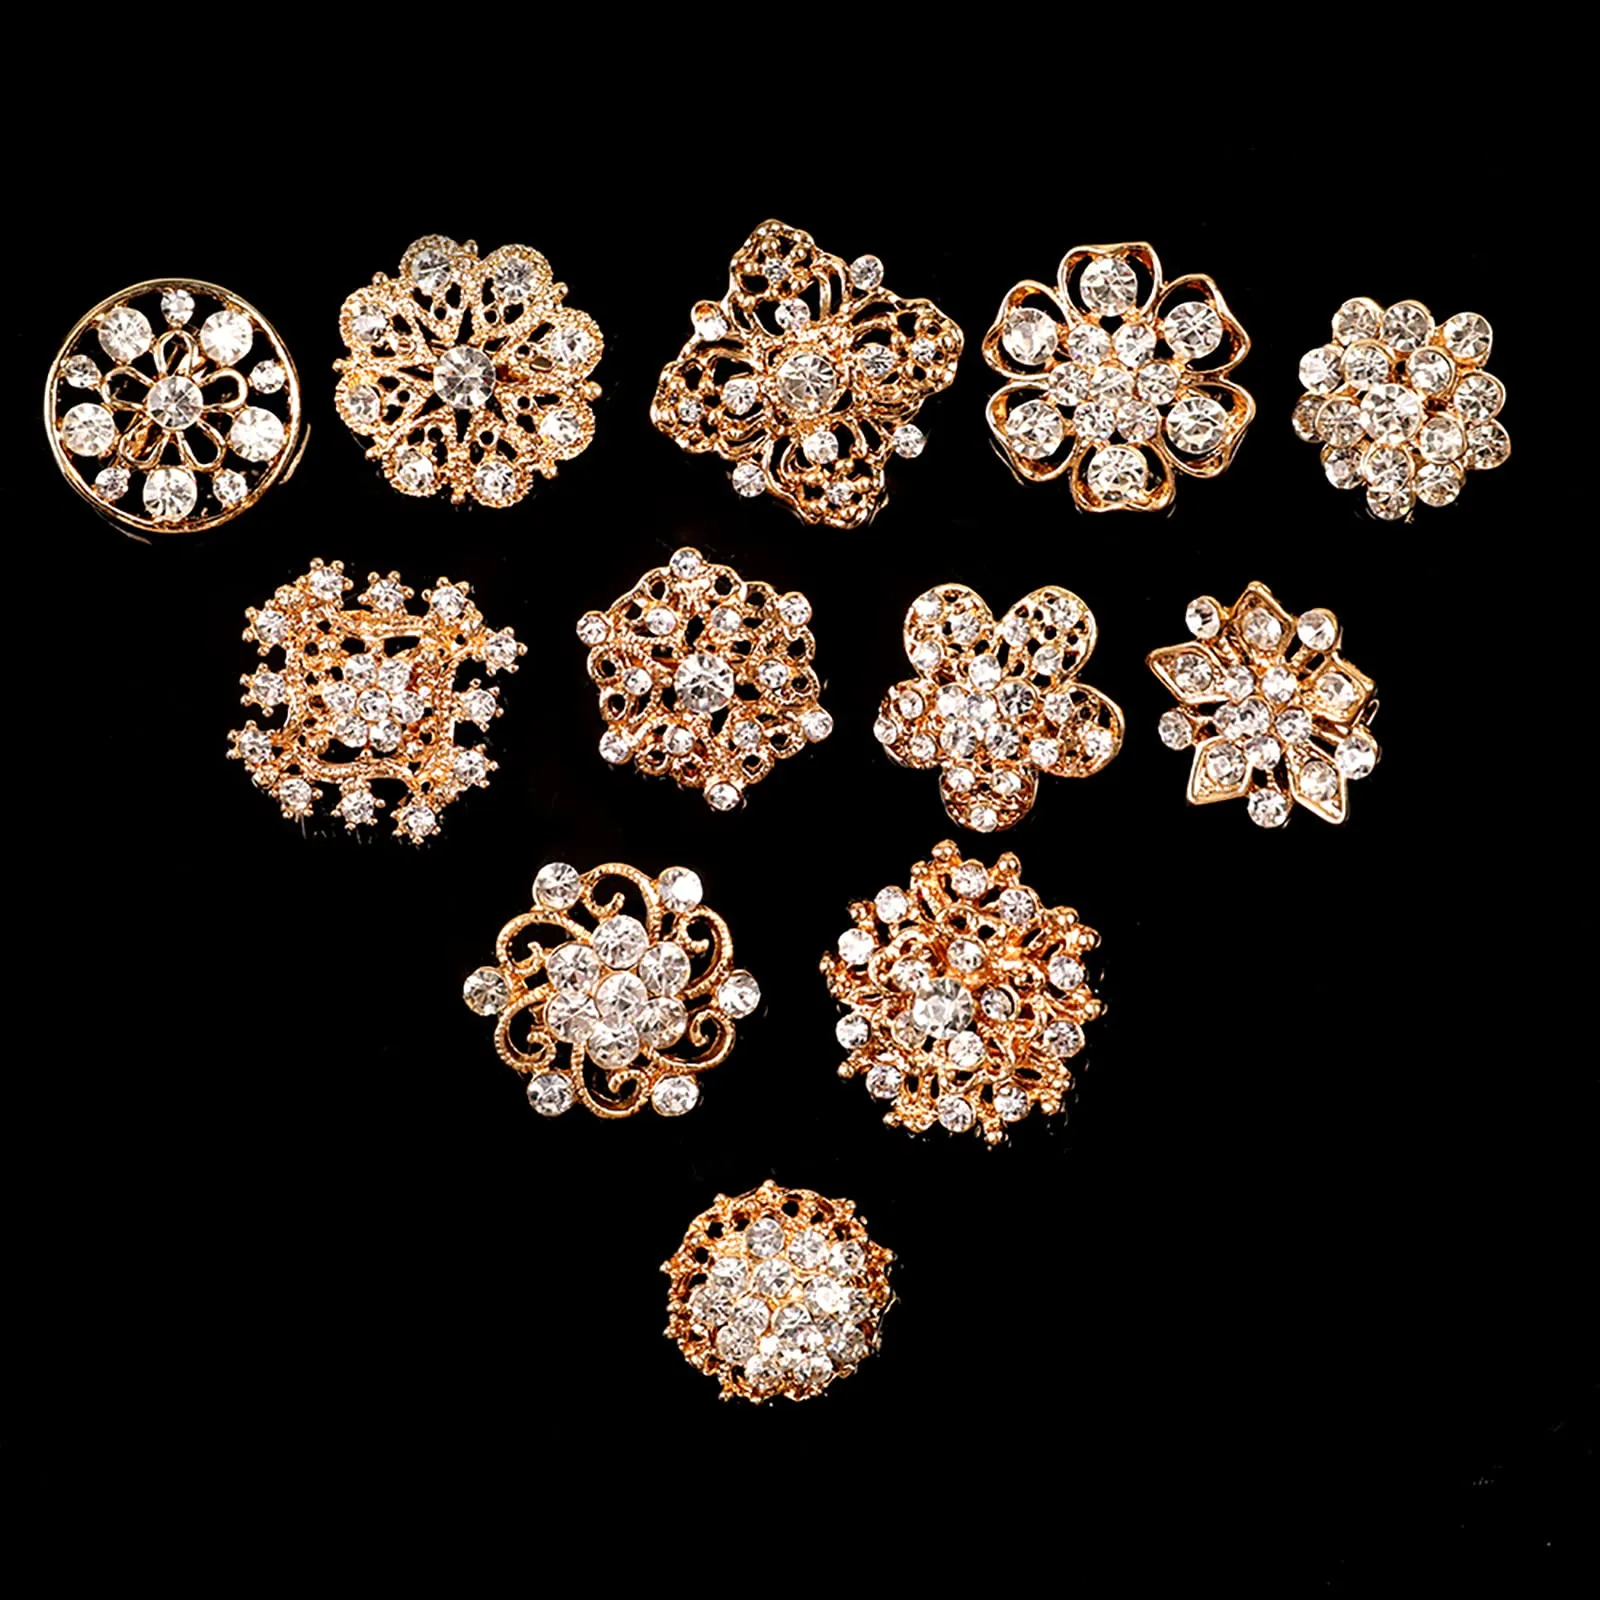 mixed rhinestone crystal brooch alloy gold vintage assorted brooch pins set for wedding bouquet party gift craft diy